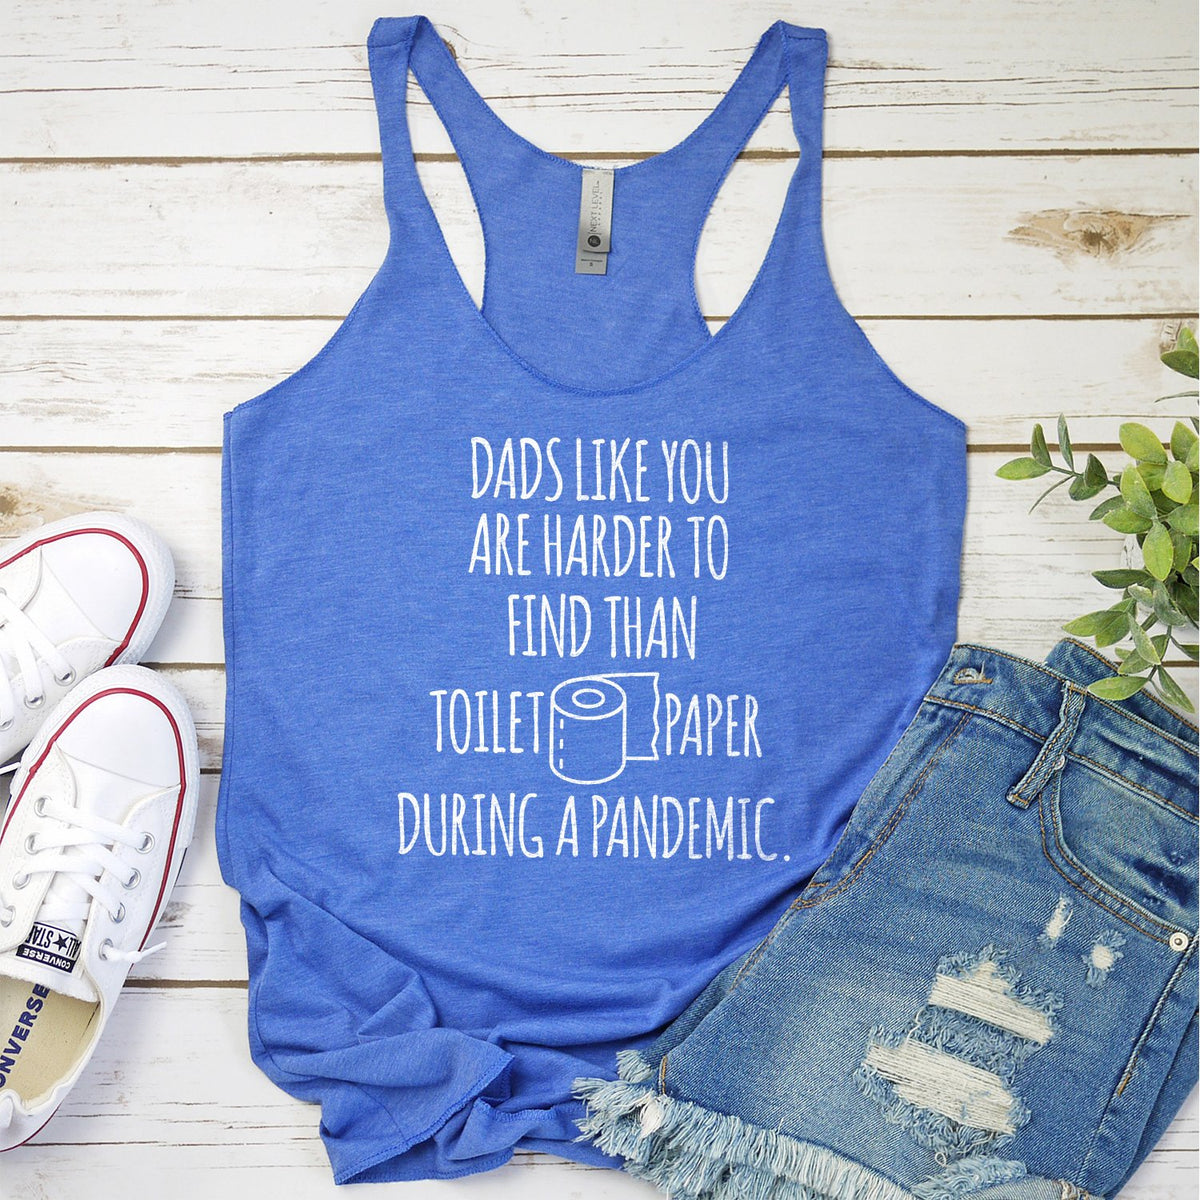 Dads Like You Are Harder to Find Than Toilet Paper During A Pandemic - Tank Top Racerback